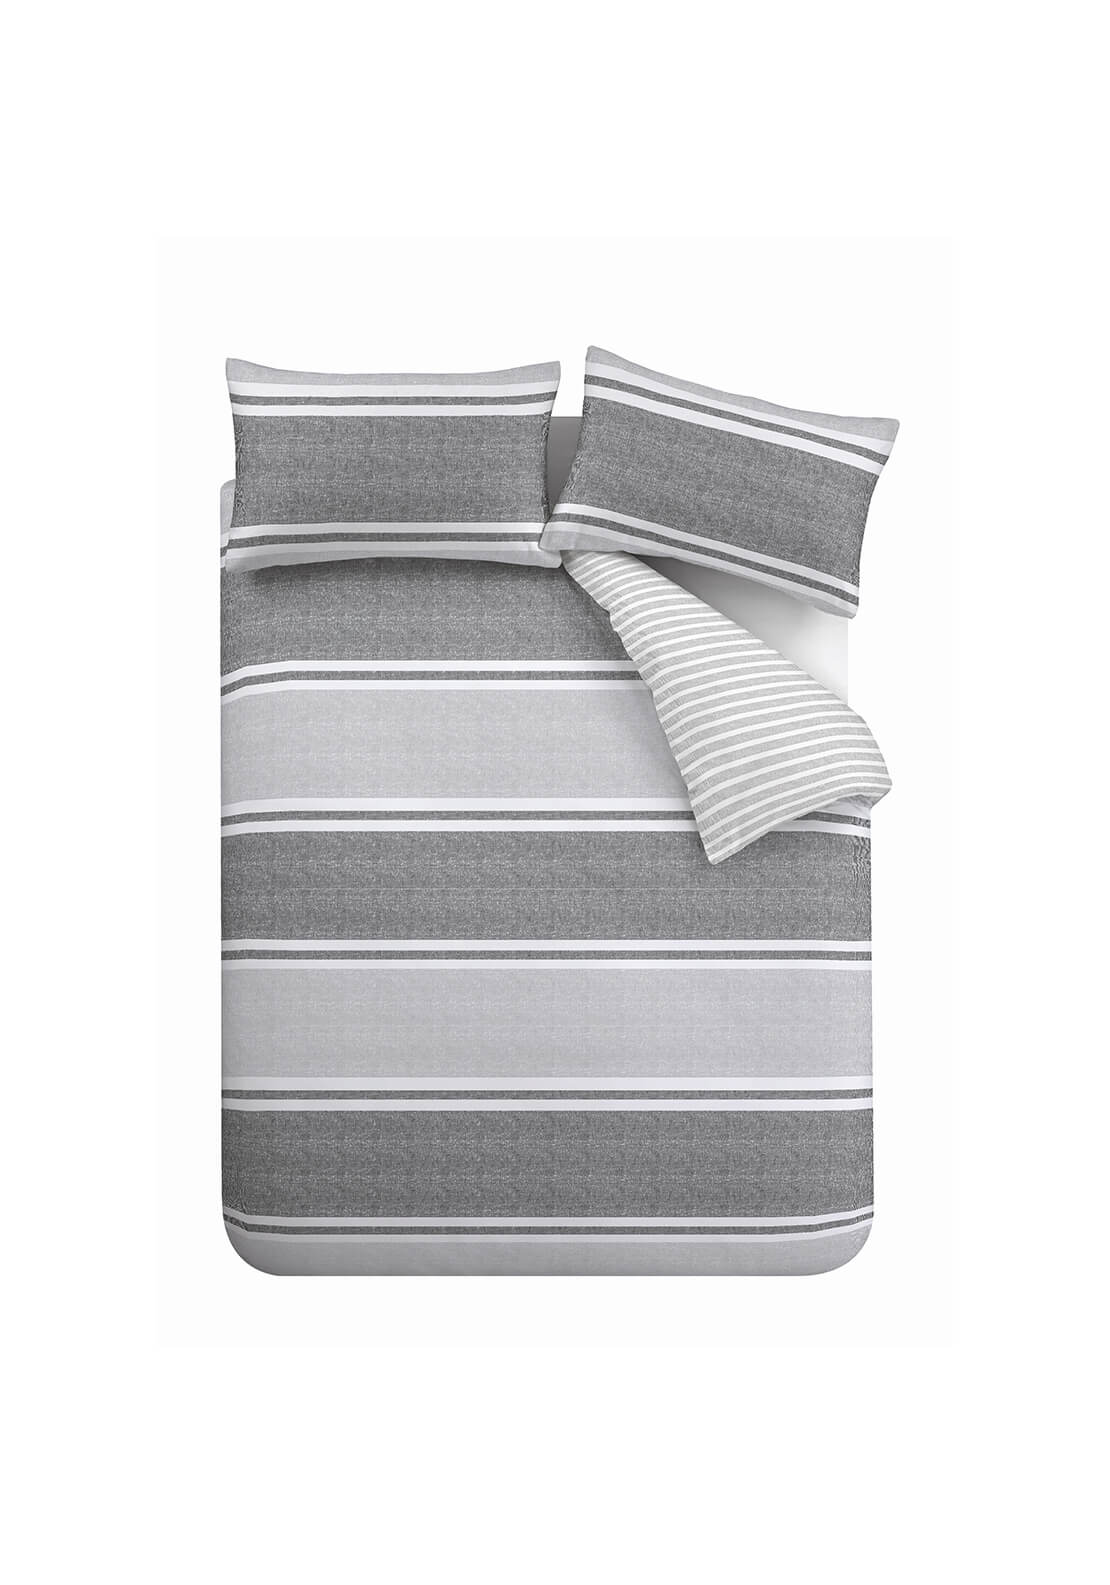  The Home Collection Classic Textured Banded Stripe Reversible Duvet Cover Set - Grey 5 Shaws Department Stores